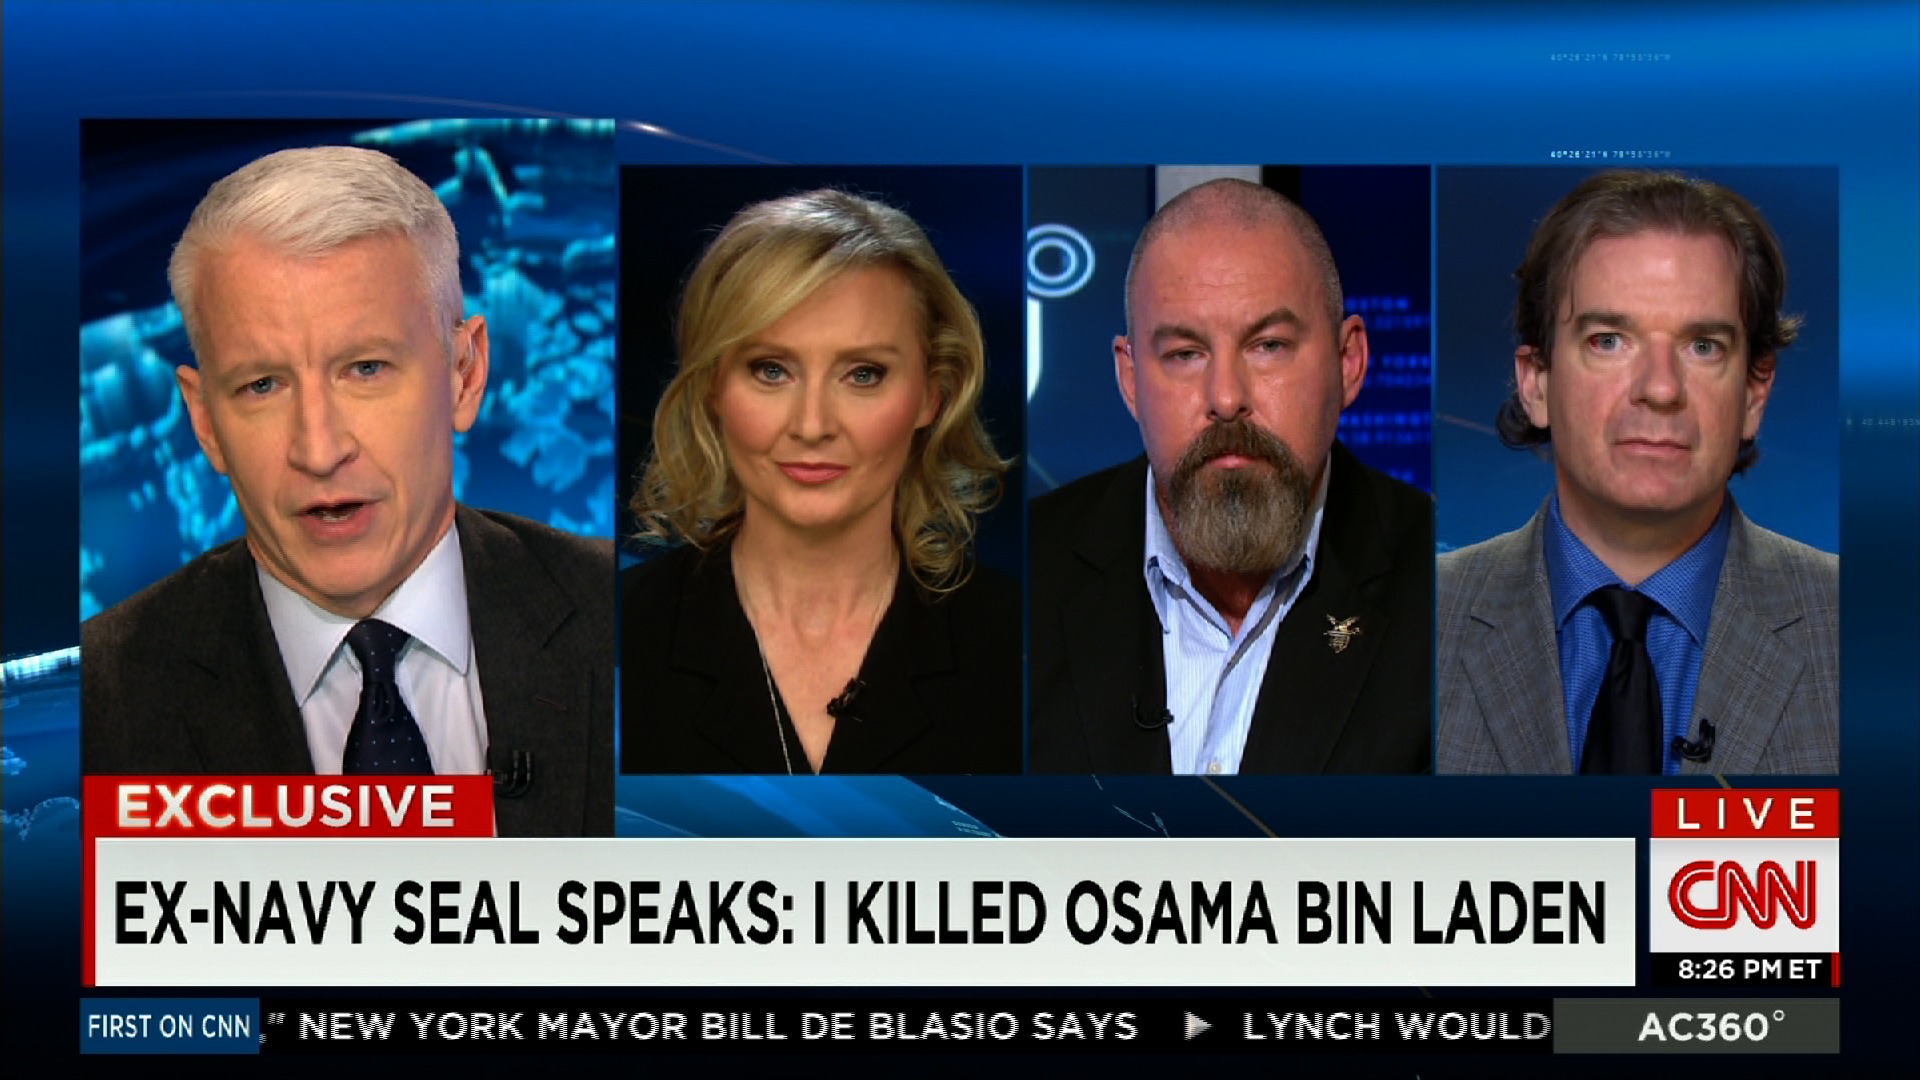 War Reporter Alex Quade's exclusive on CNN's Anderson Cooper 360. Left-right: Anderson Cooper, Alex Quade, Former Navy SEAL and FBI Special Agent Jonathan T.Gilliam, CNN National Security Analyst Peter Bergen. November 2014.